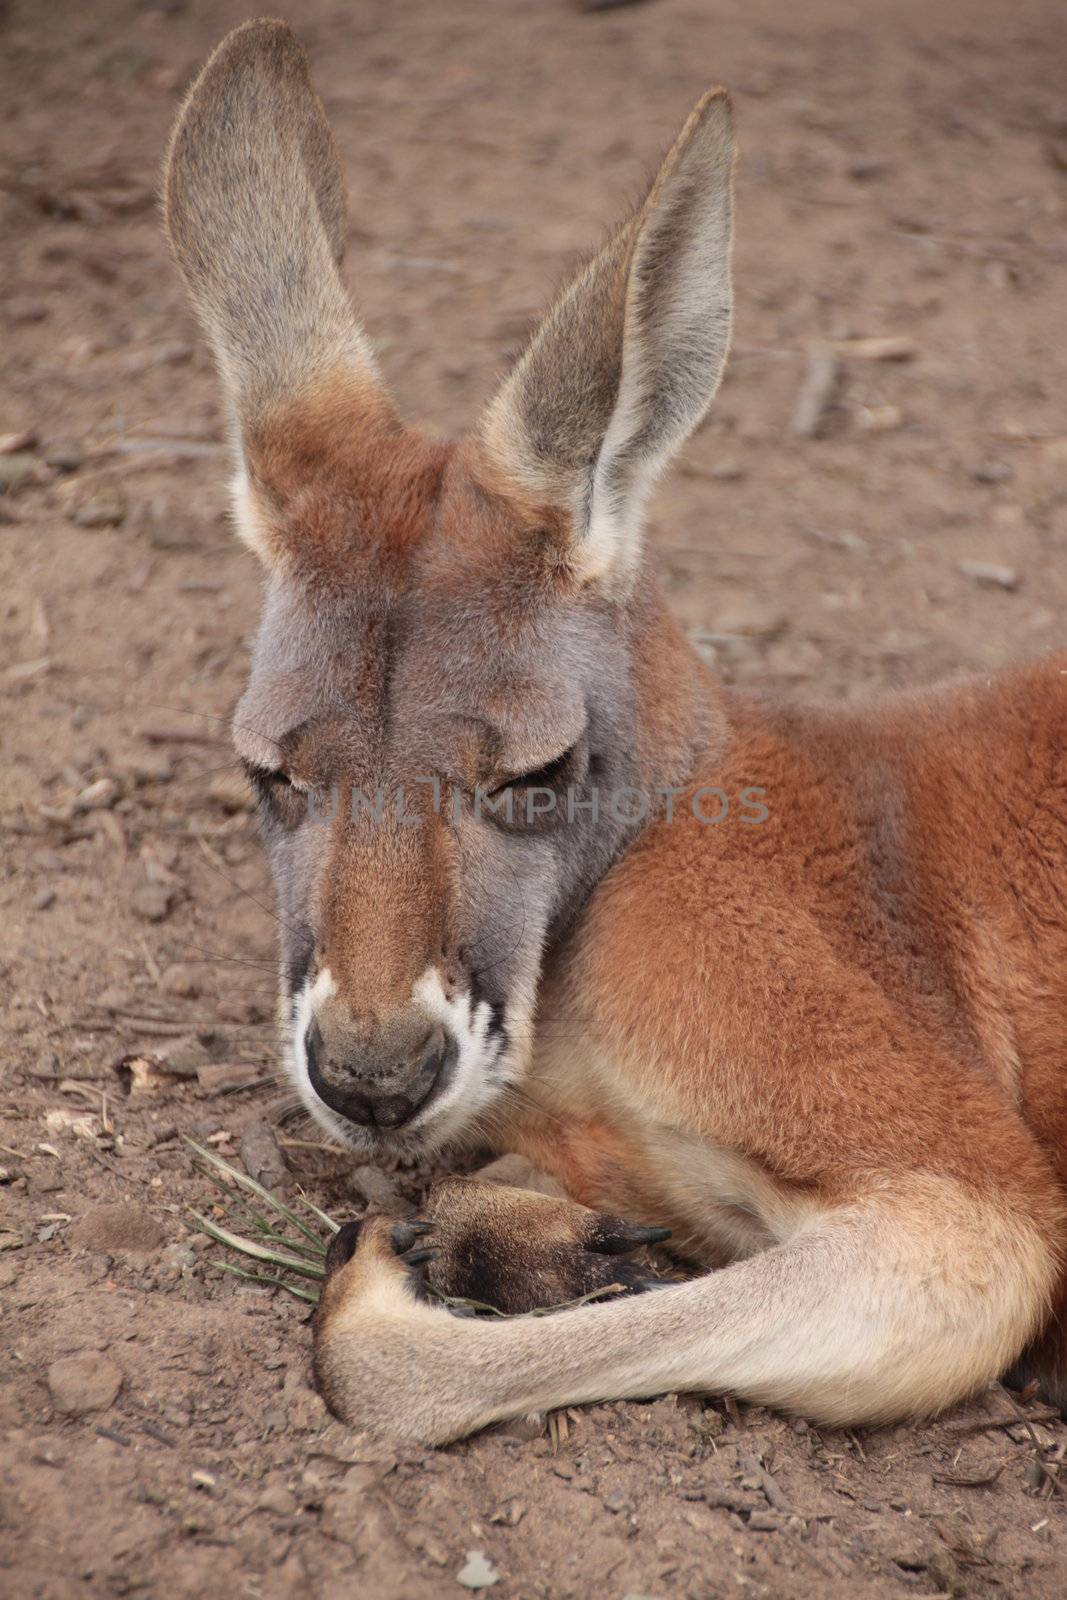 Side profile head shot of a red and grey Australian Kangaroo resting